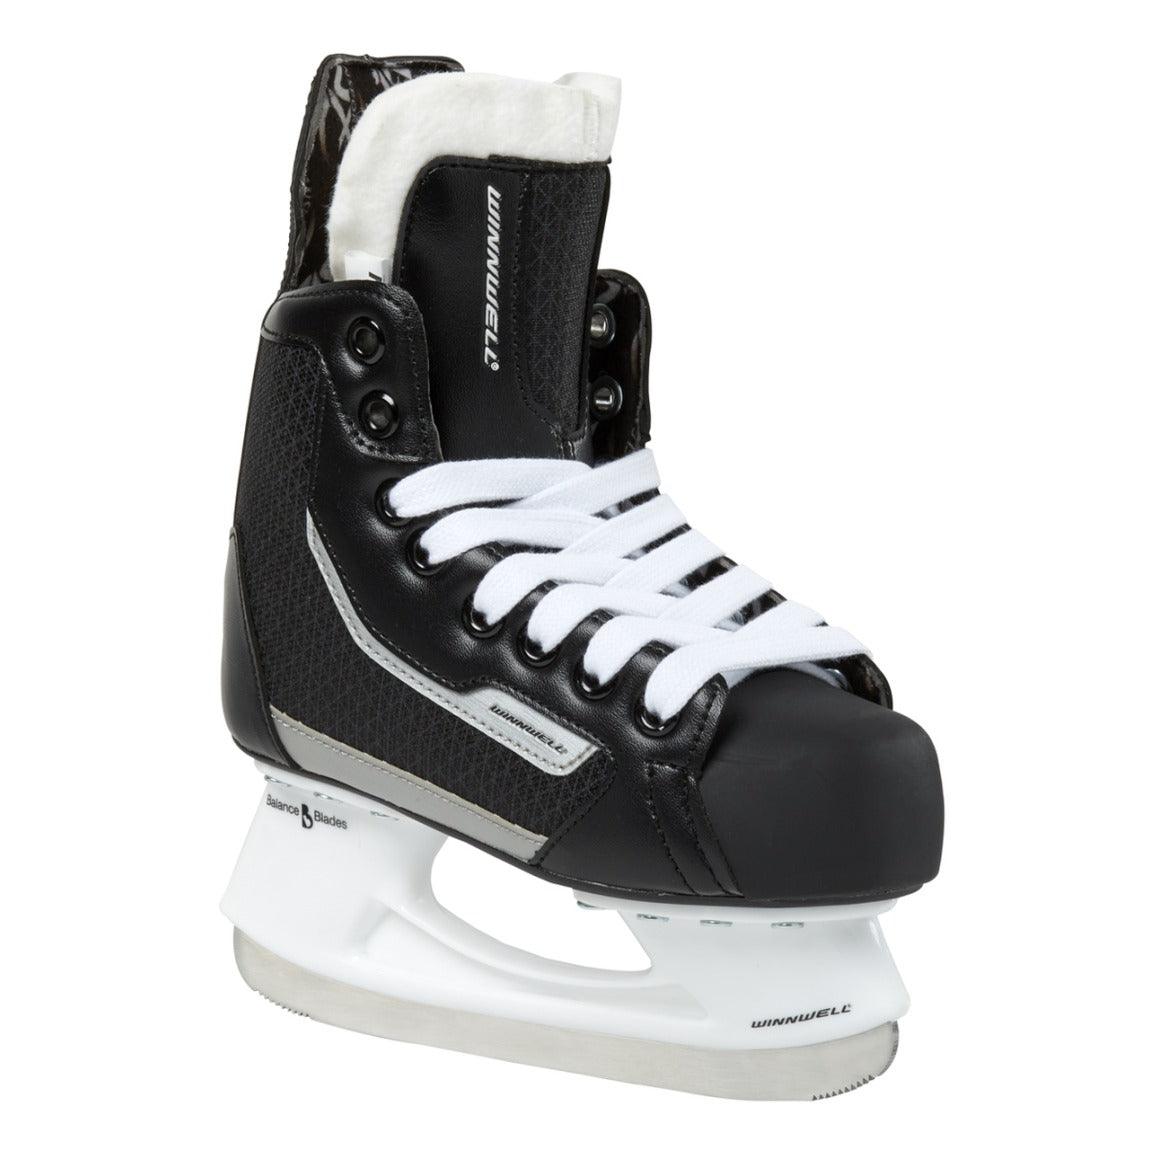 AMP300 Skate with Balance Blades - Youth - Sports Excellence